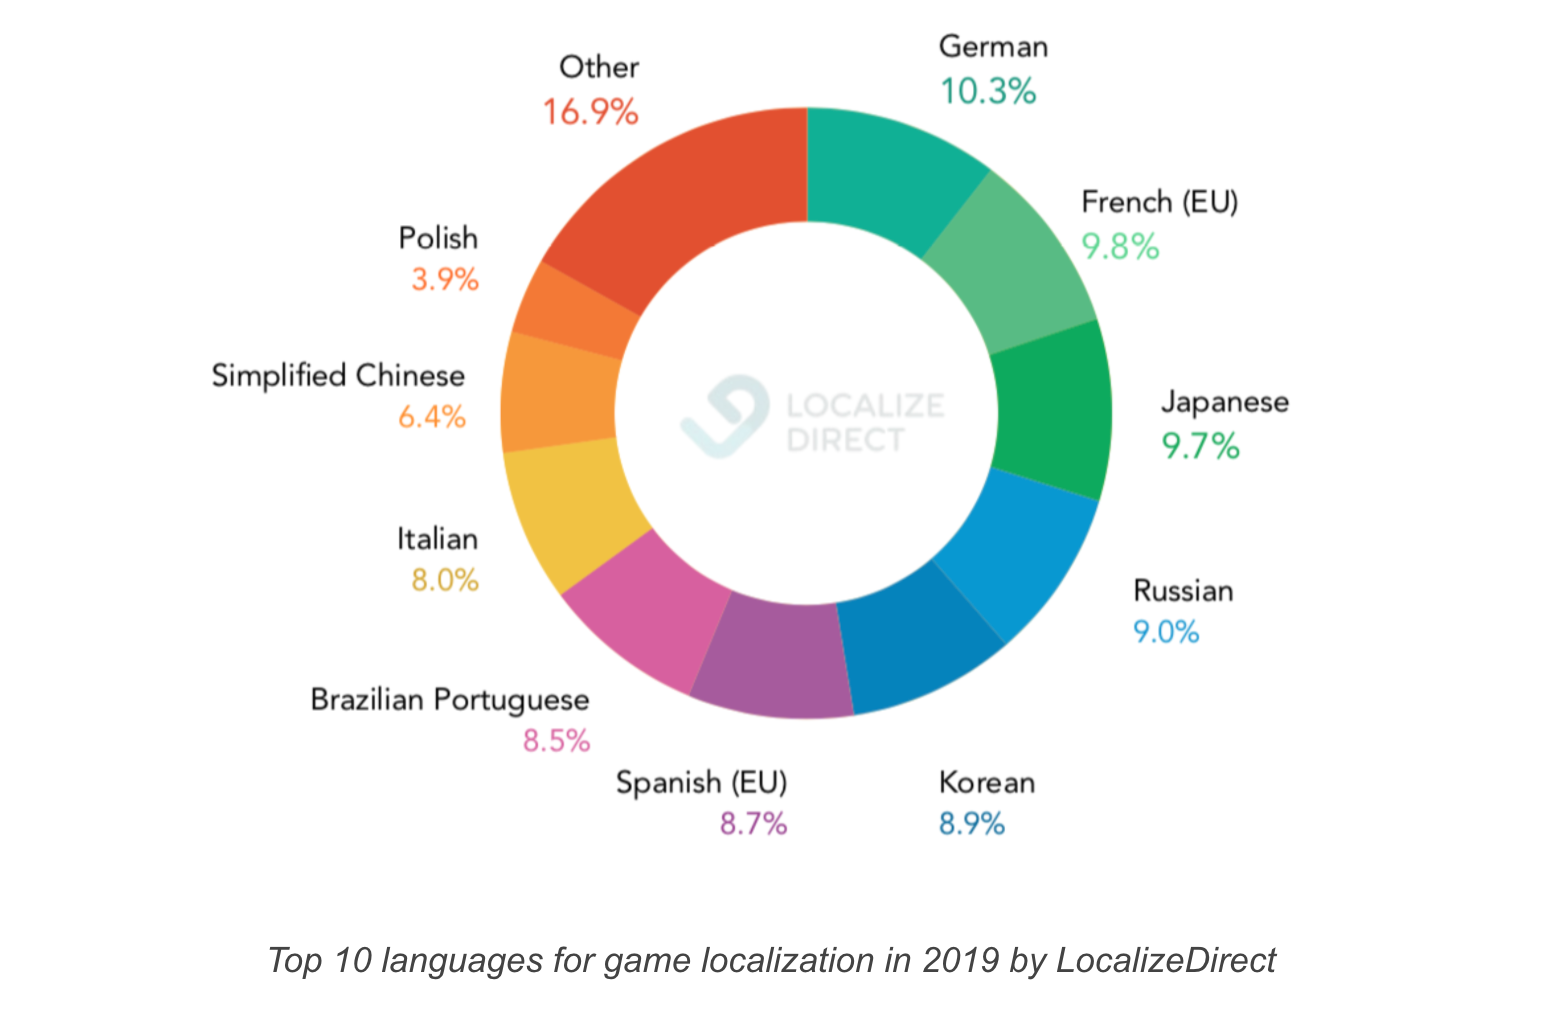 Top 10 languages for game localization in 2019